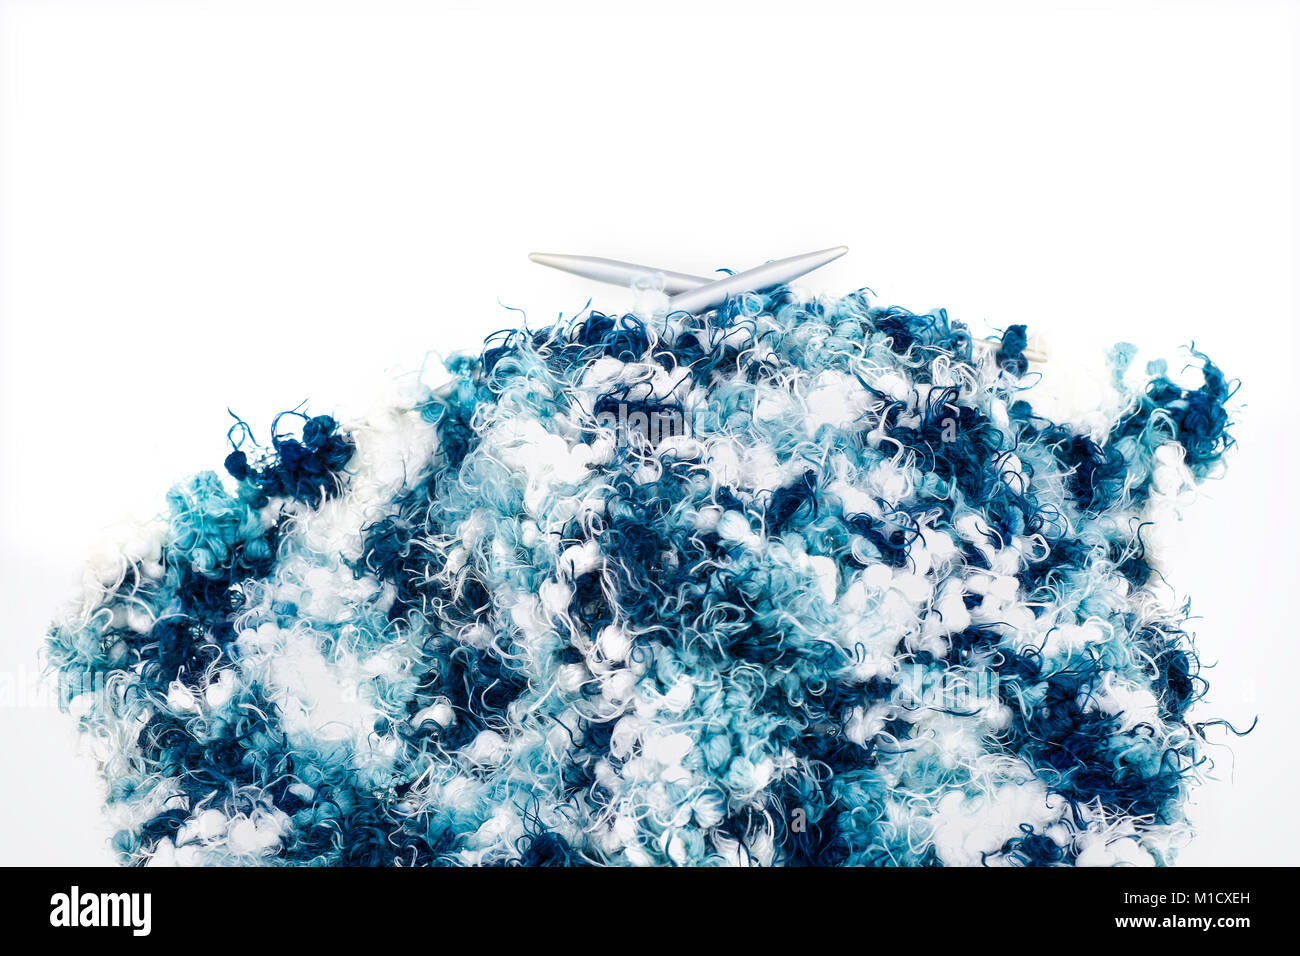 Knitting kit with blue colored, fluffy wool isolated in front of white background Stock Photo